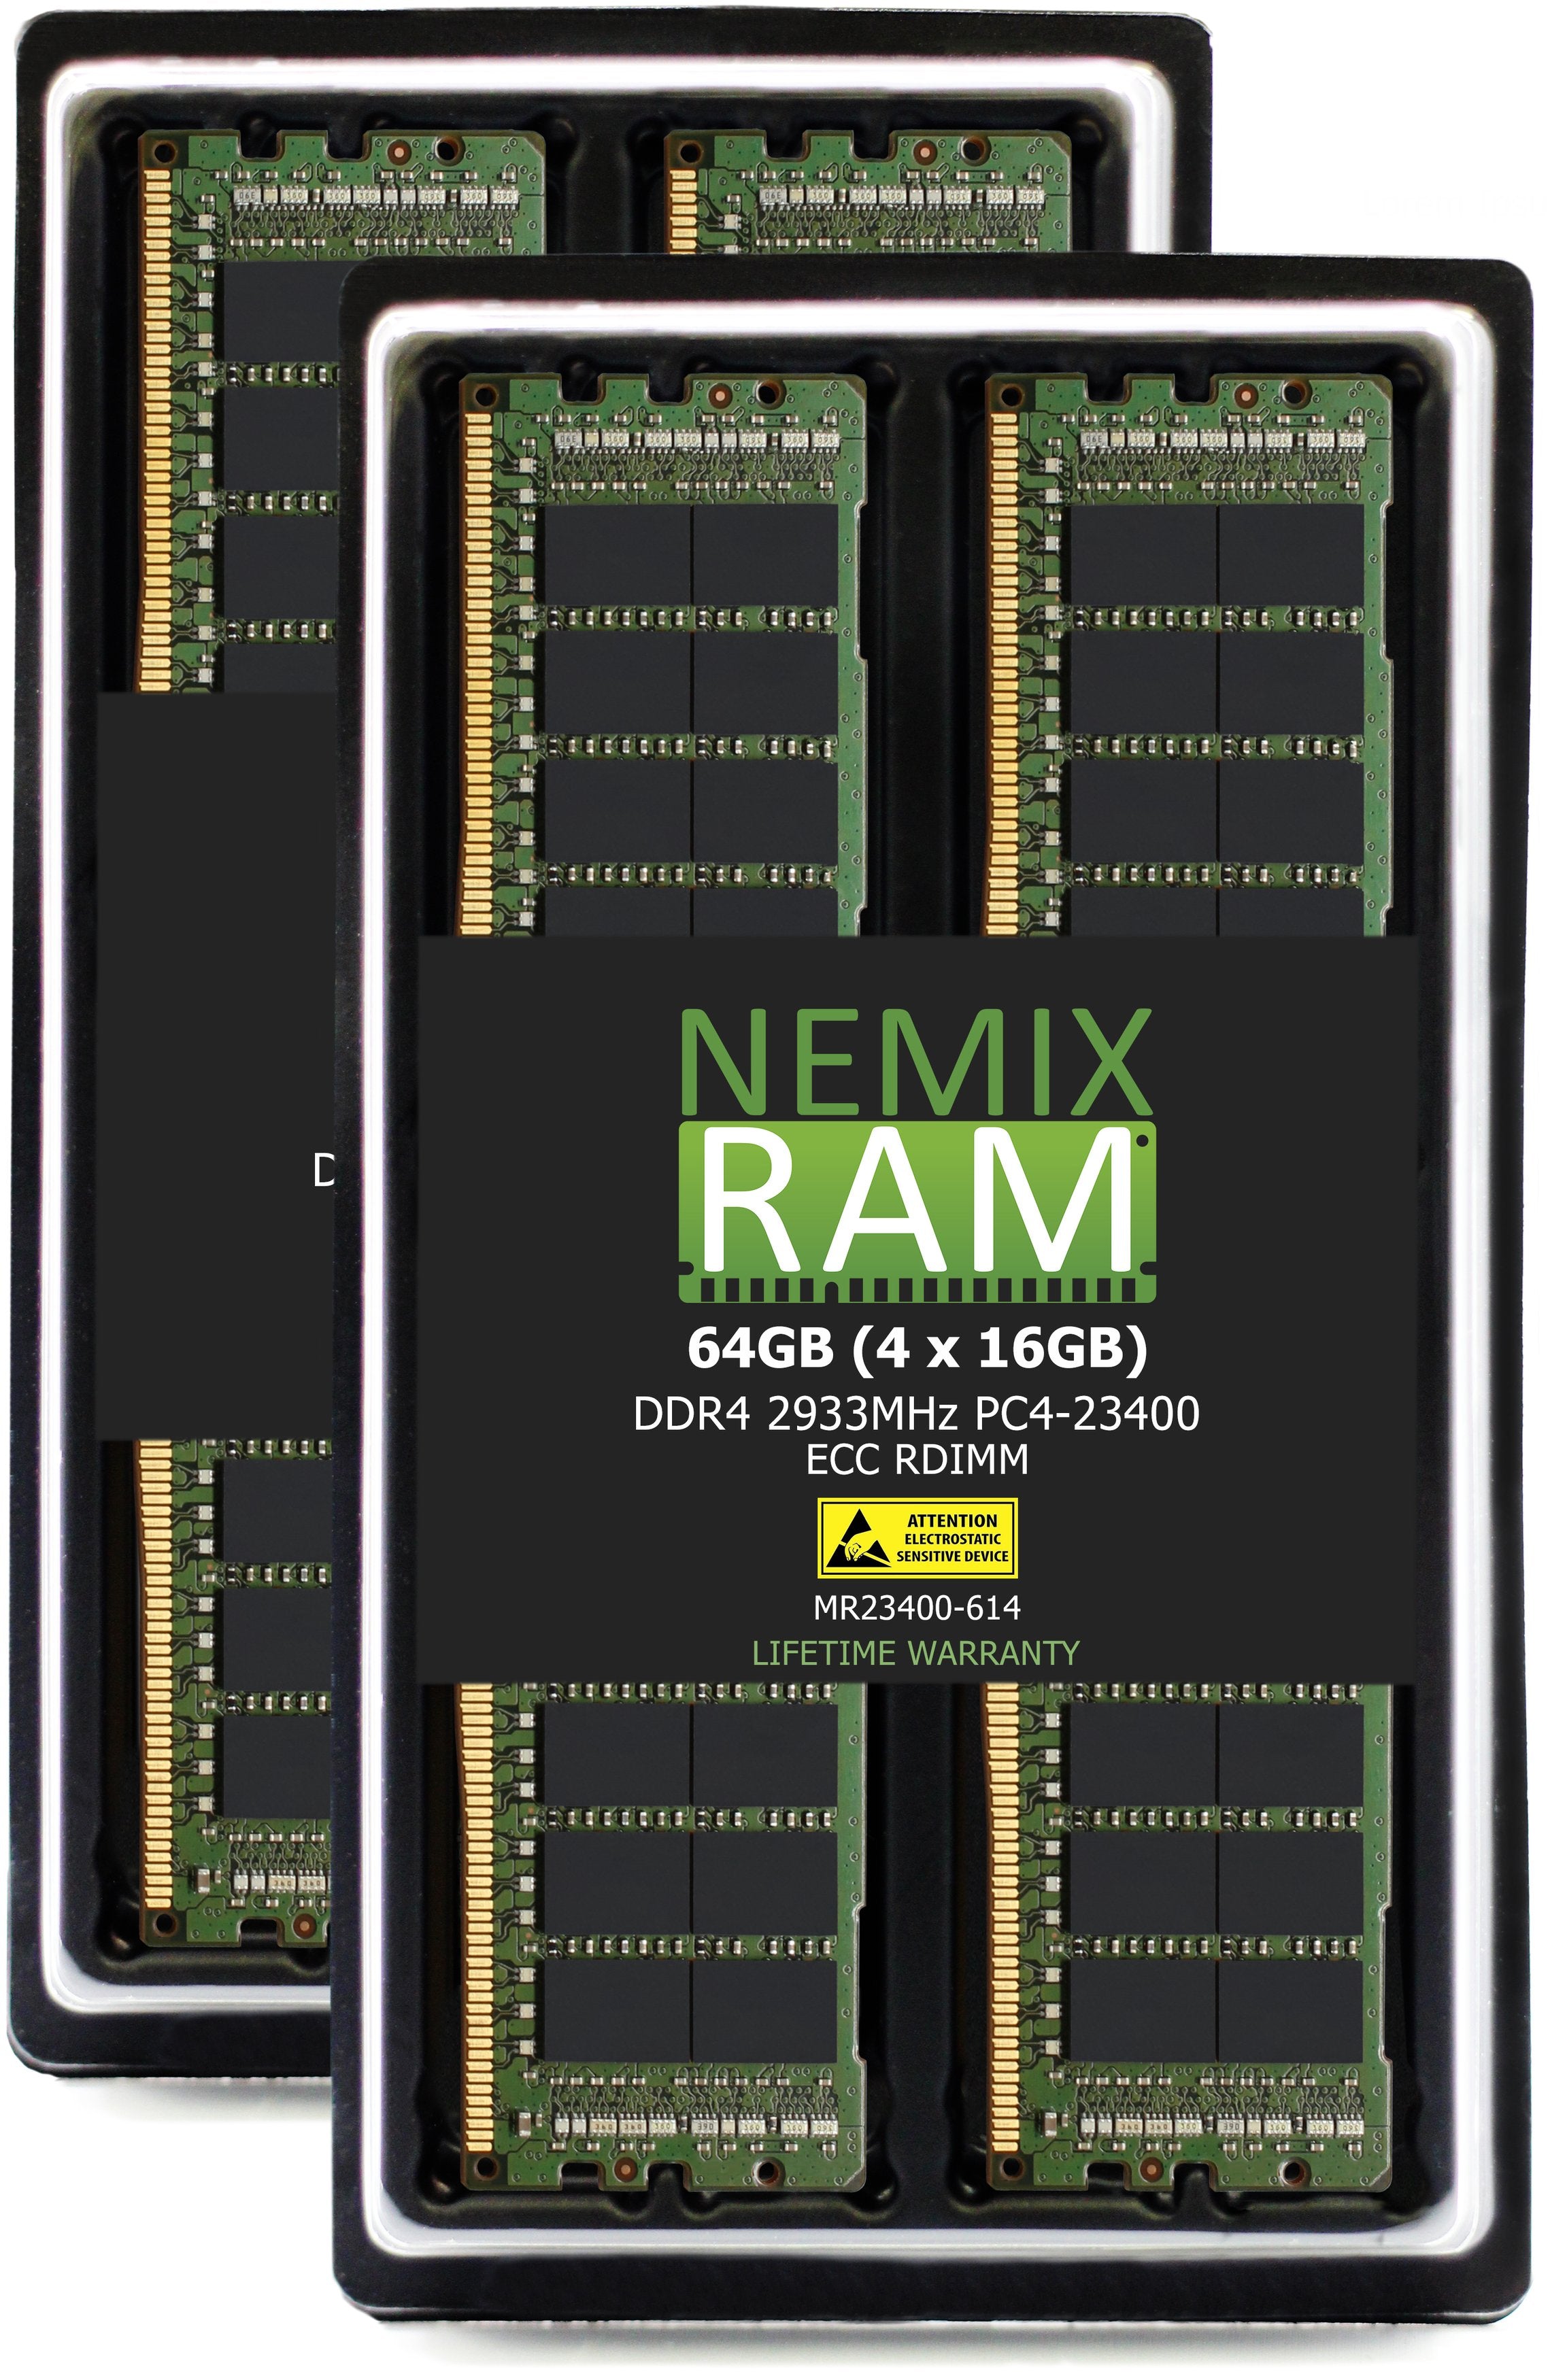 DDR4 2933MHZ PC4-23400 RDIMM for Apple Mac Pro 2019 7,1